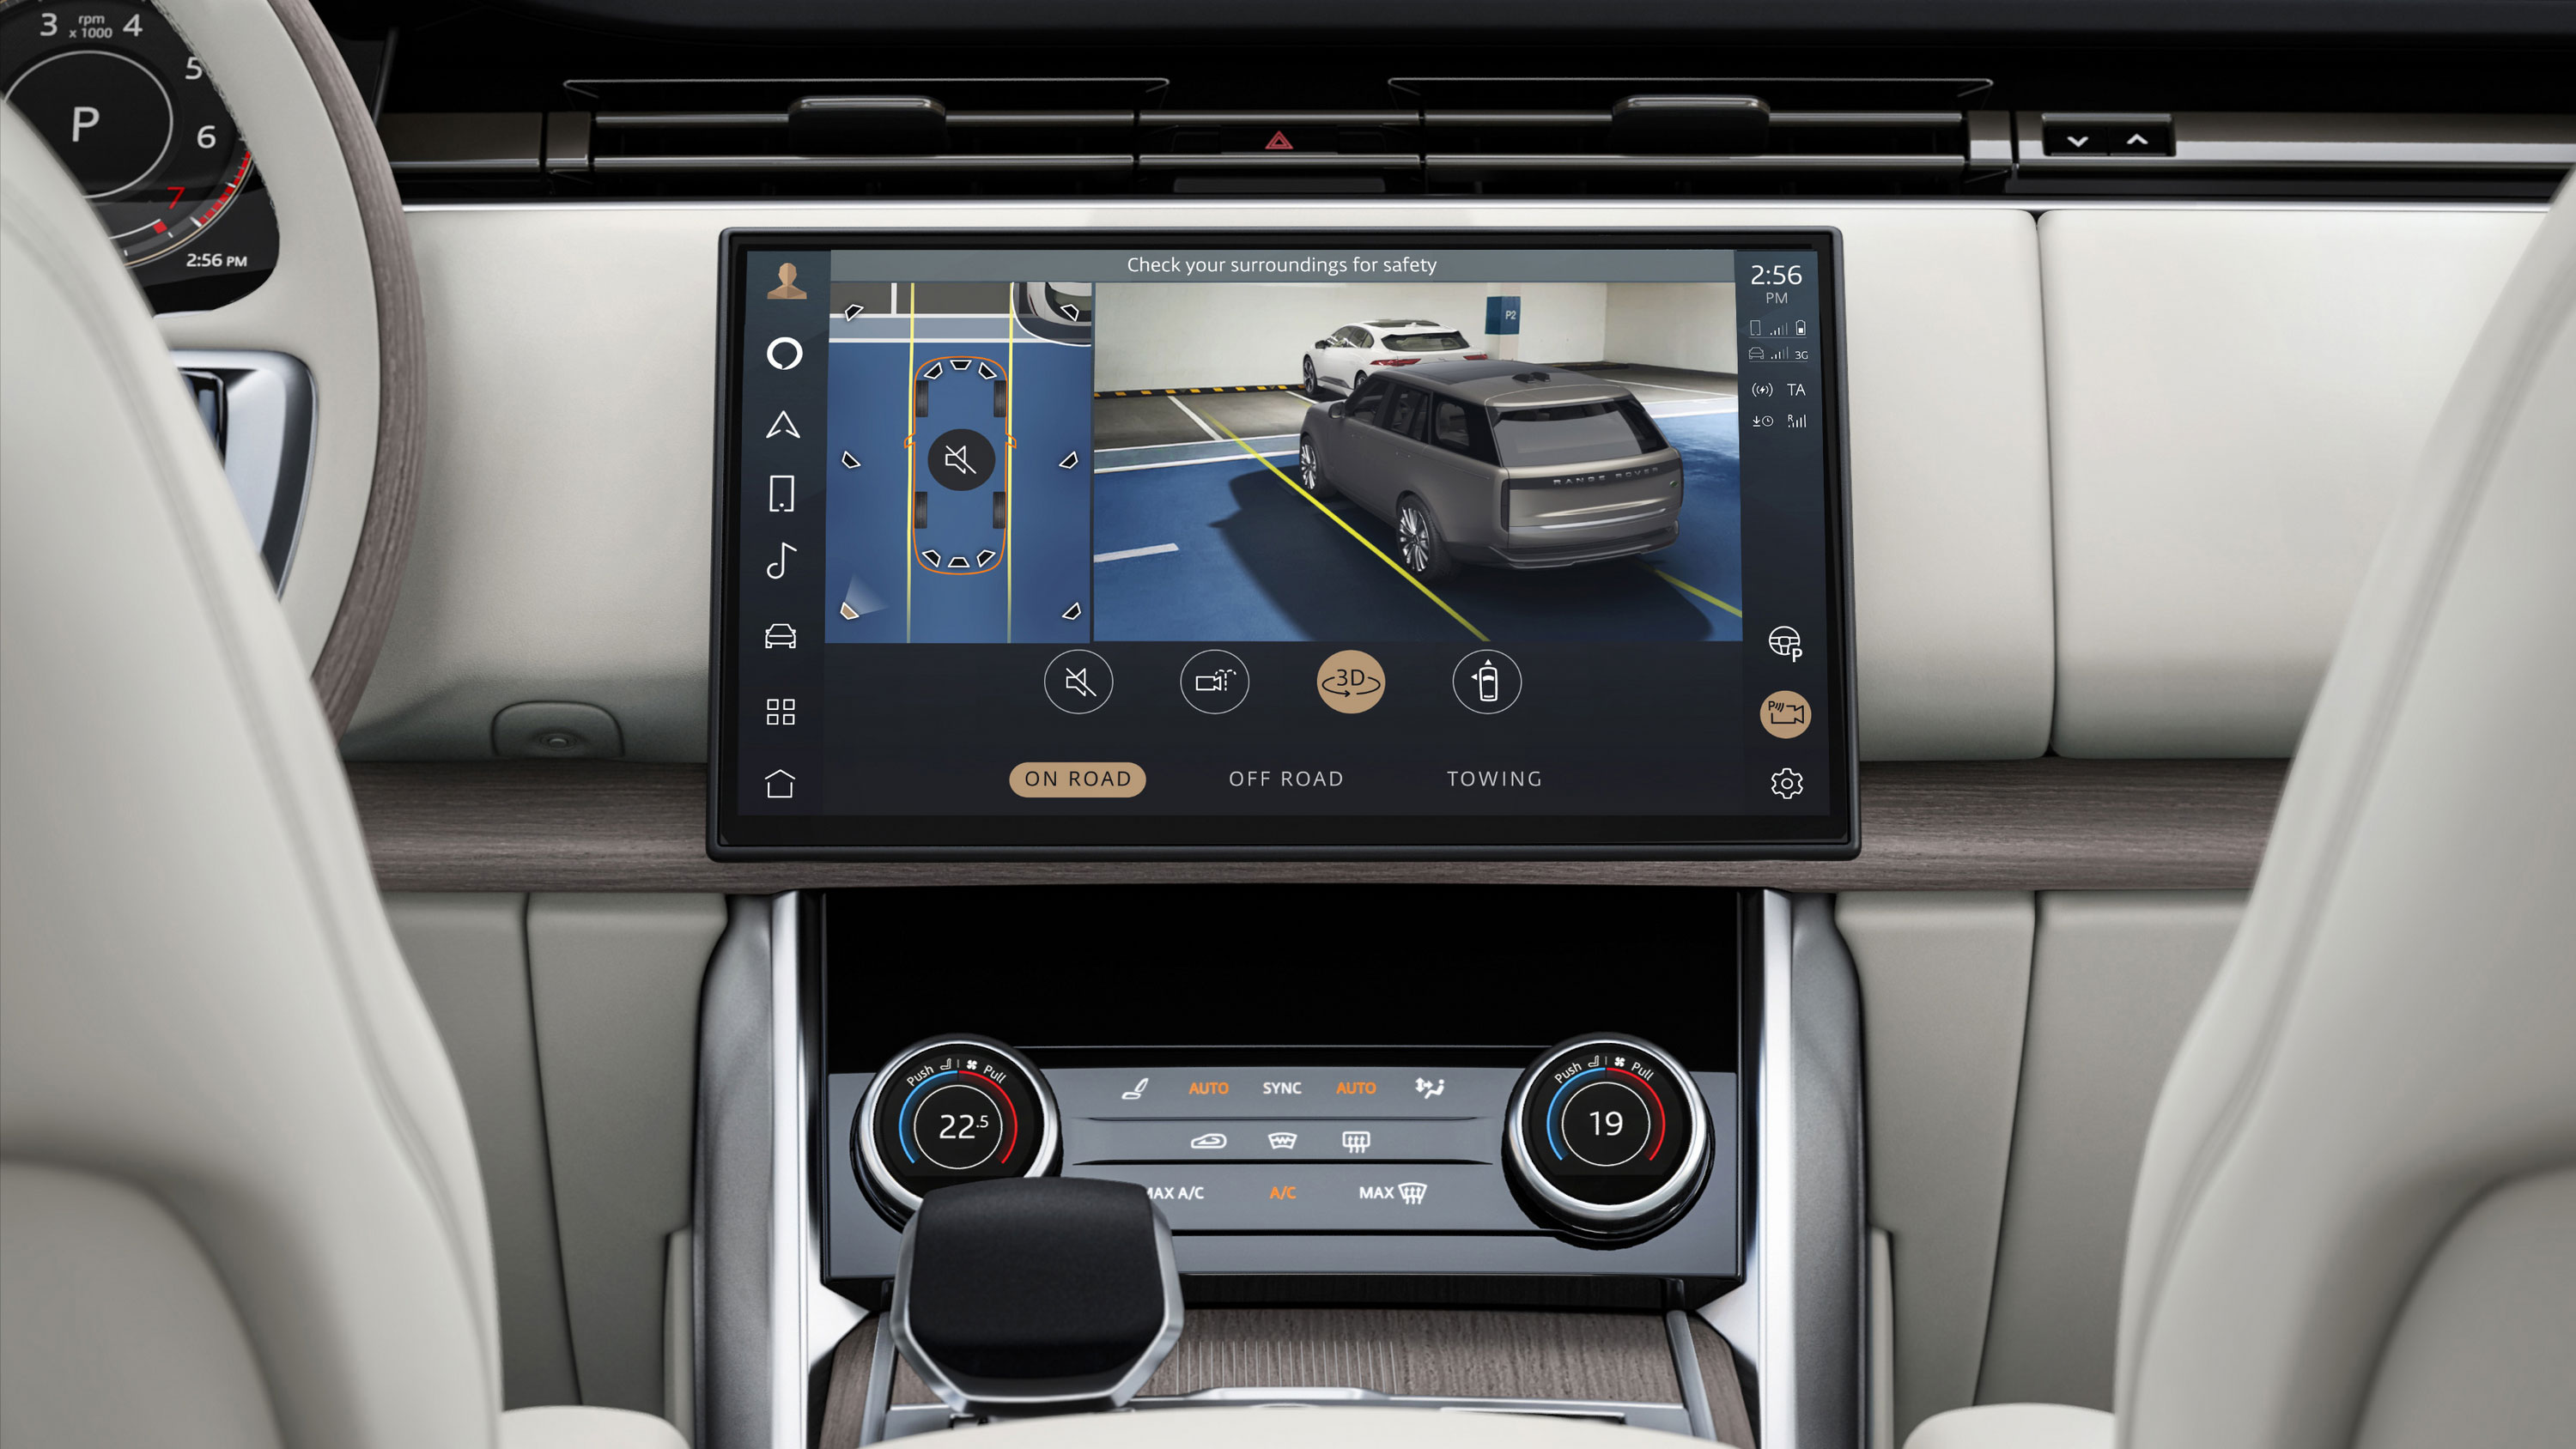 Large, floating infotainment display